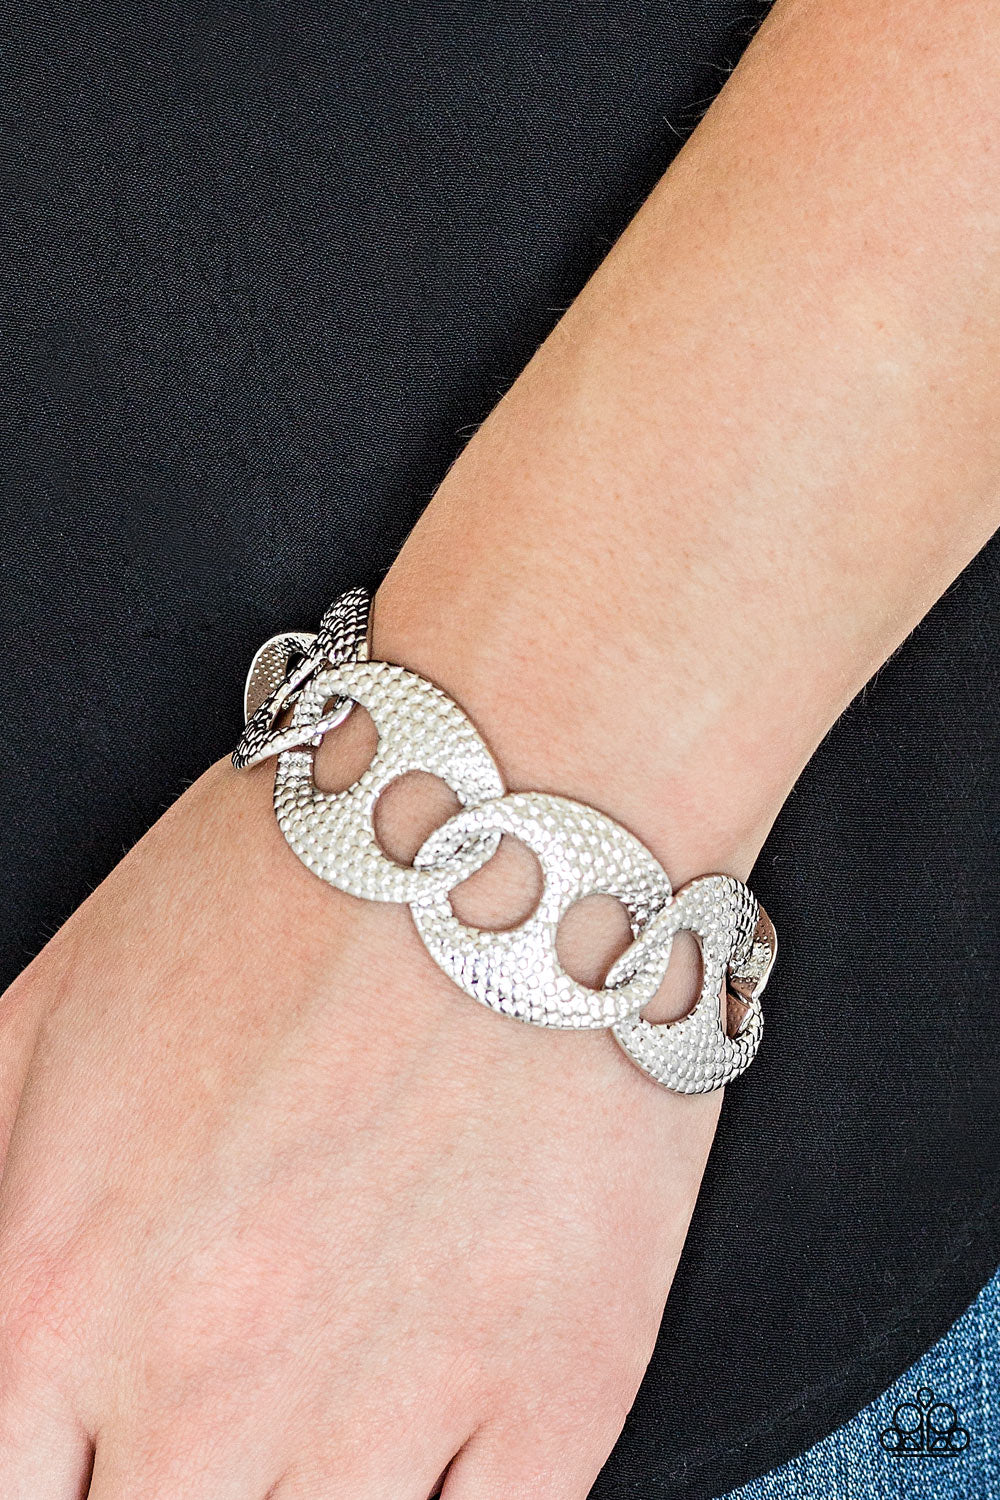 Paparazzi Casual Connoisseur - Silver - Bold Circular Patterns - Bracelet - $5 Jewelry With Ashley Swint